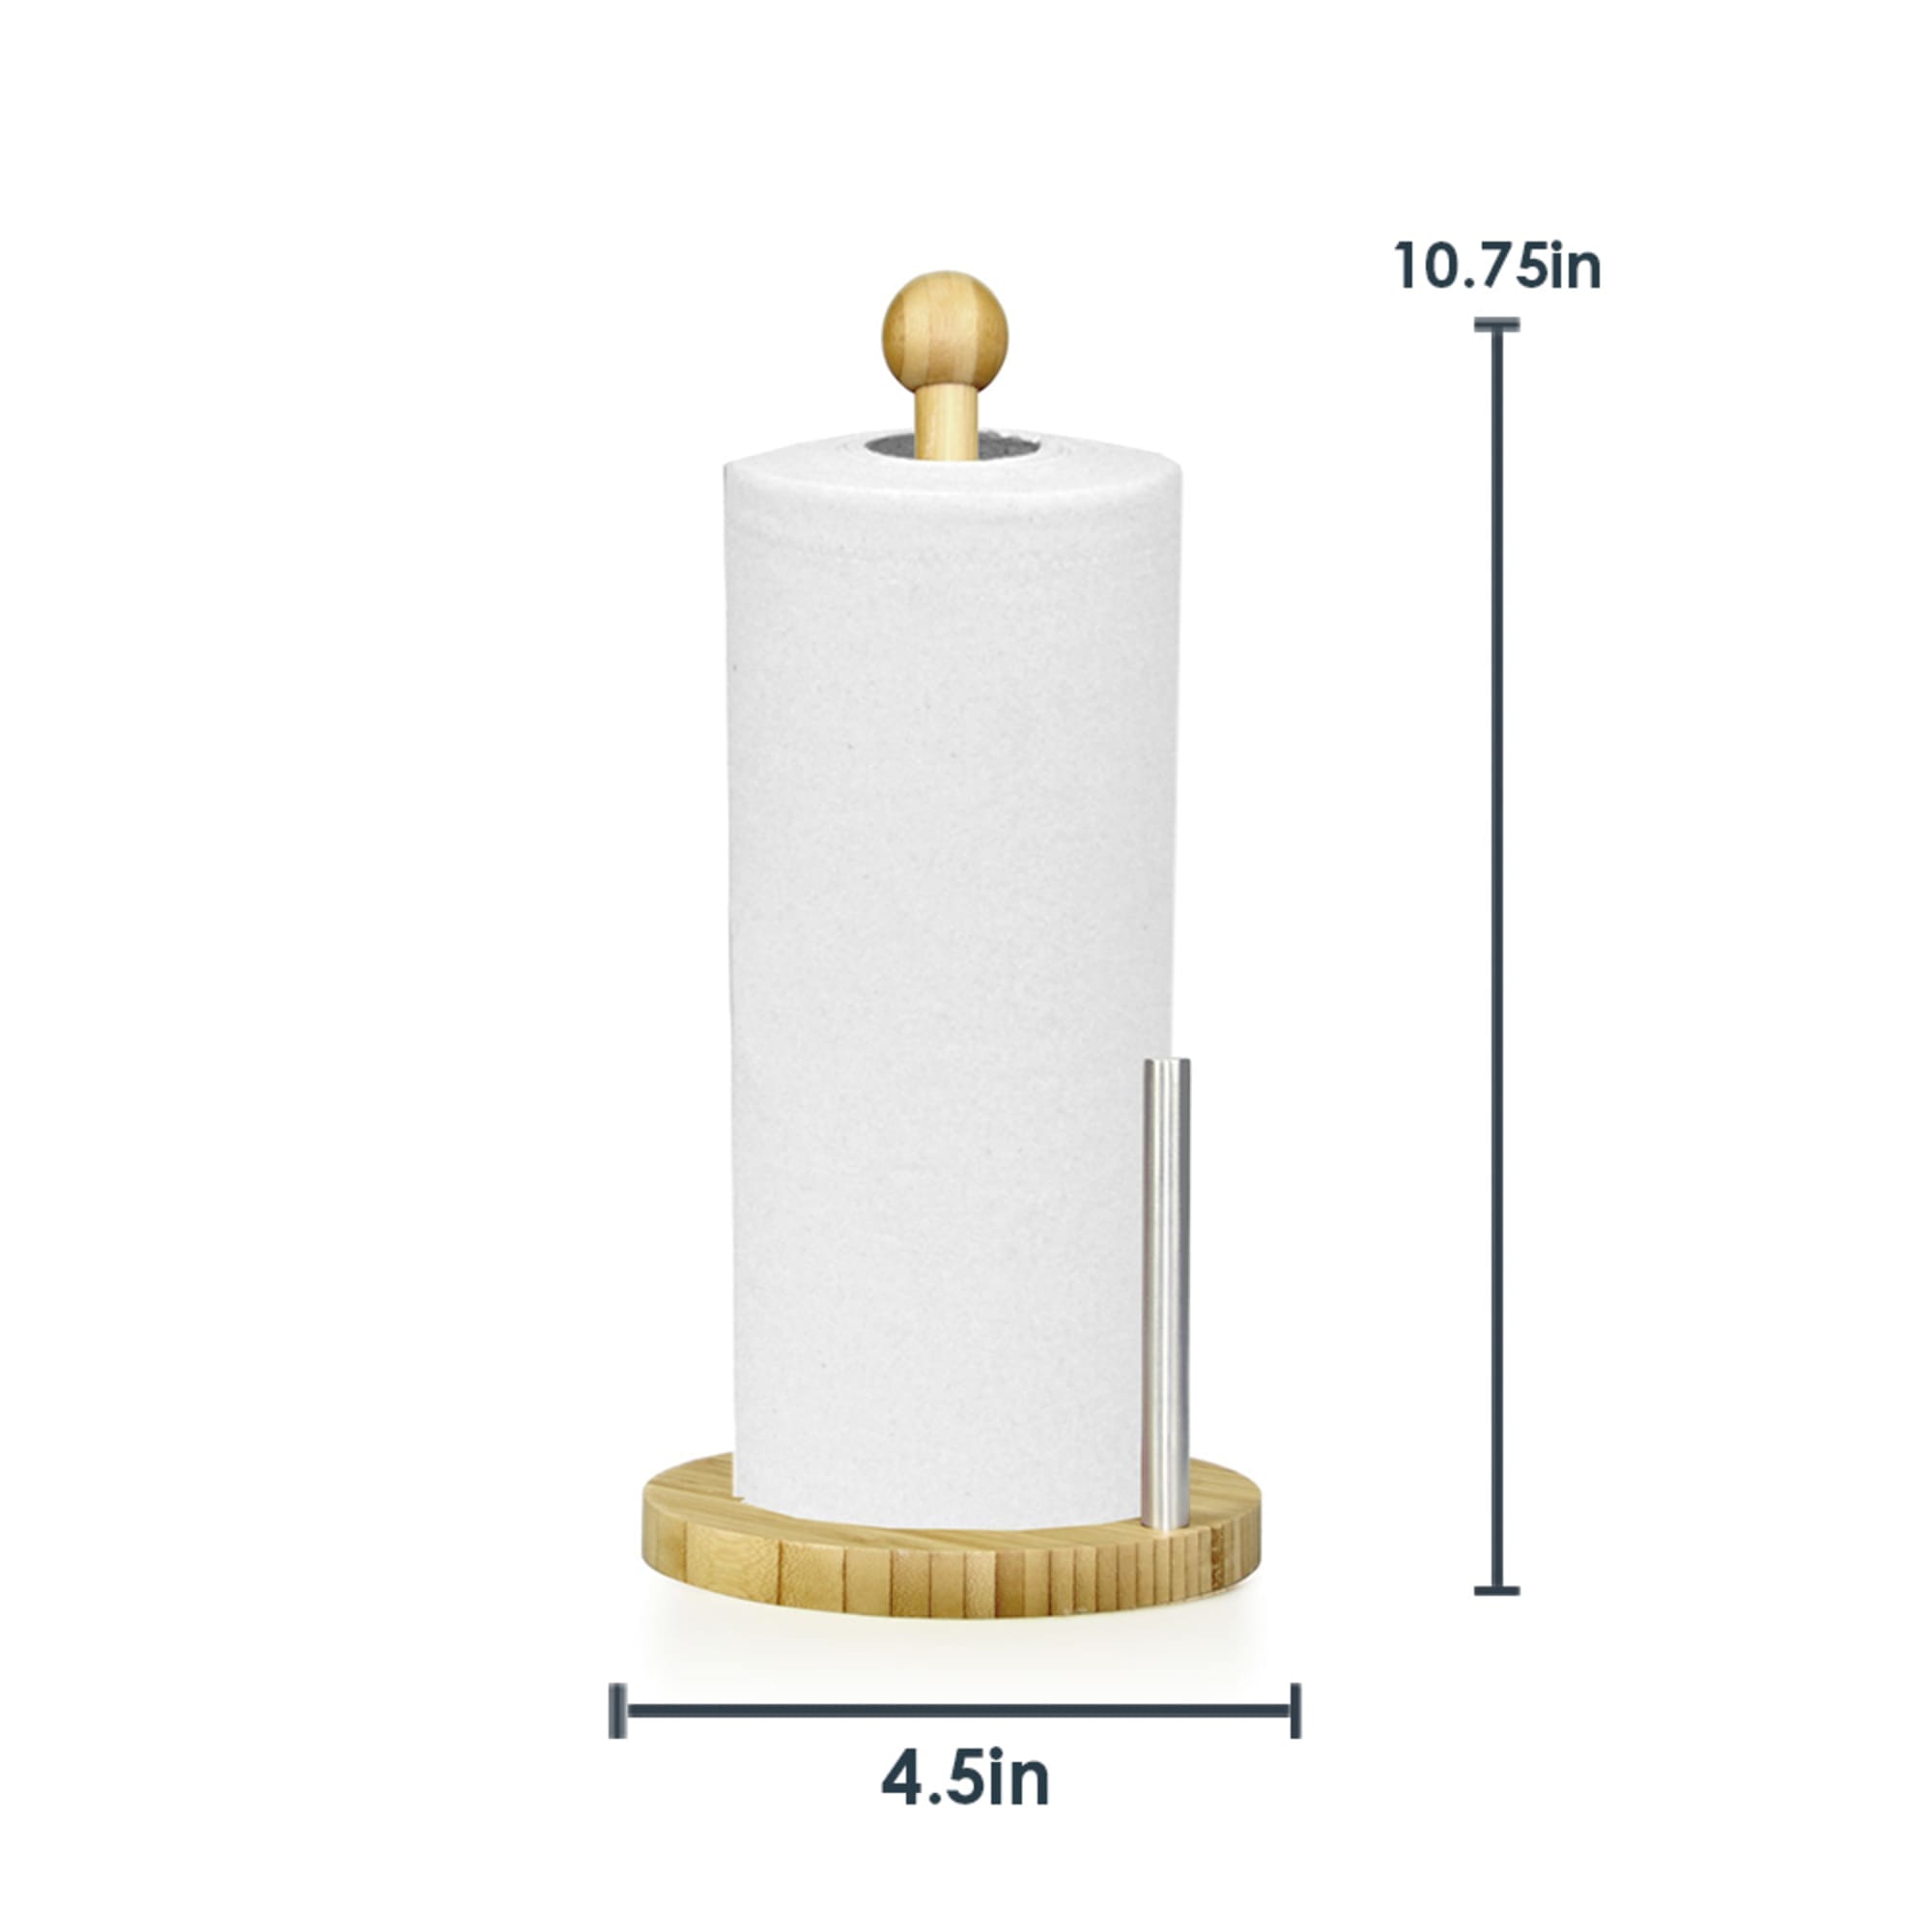 Home Basics Bamboo Paper Towel Holder with Steel Dispensing Side Bar $6.00 EACH, CASE PACK OF 12